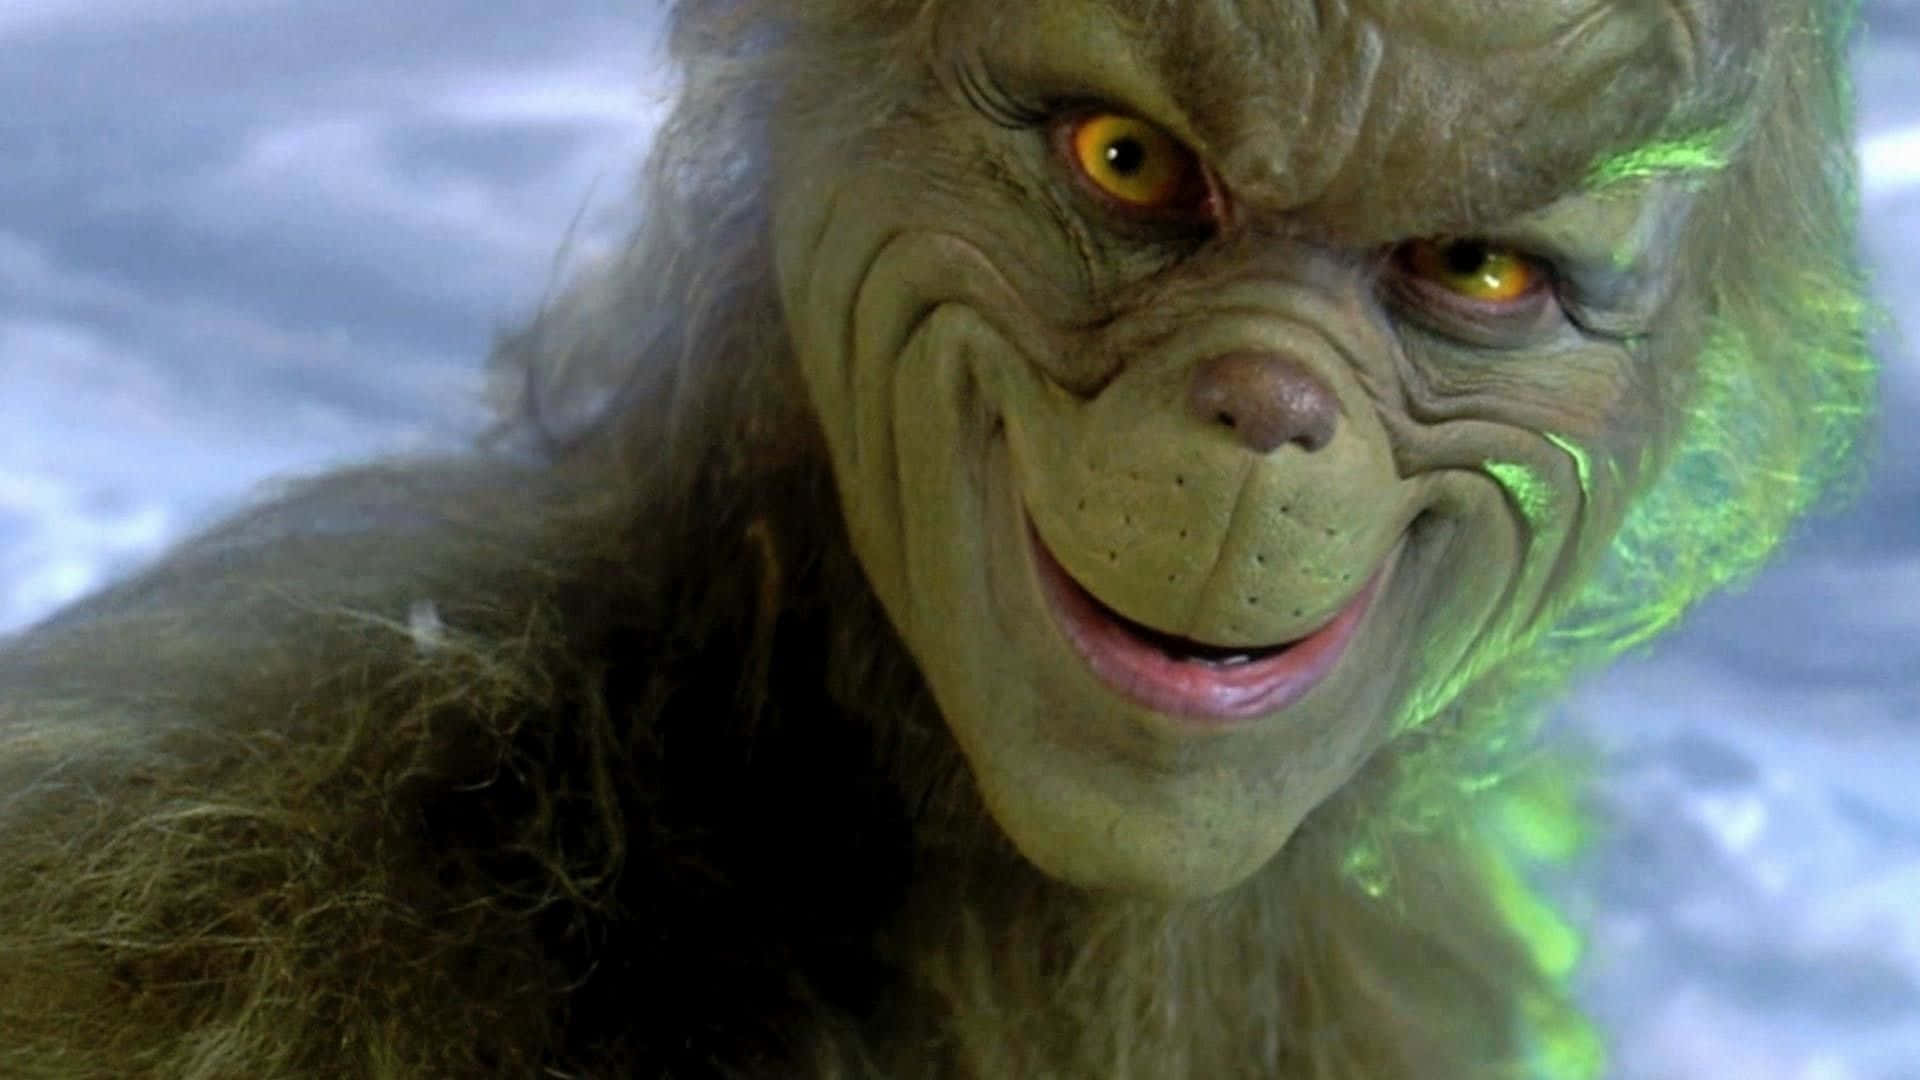 Get into the Christmas spirit this year with a Grinch Zoom background!